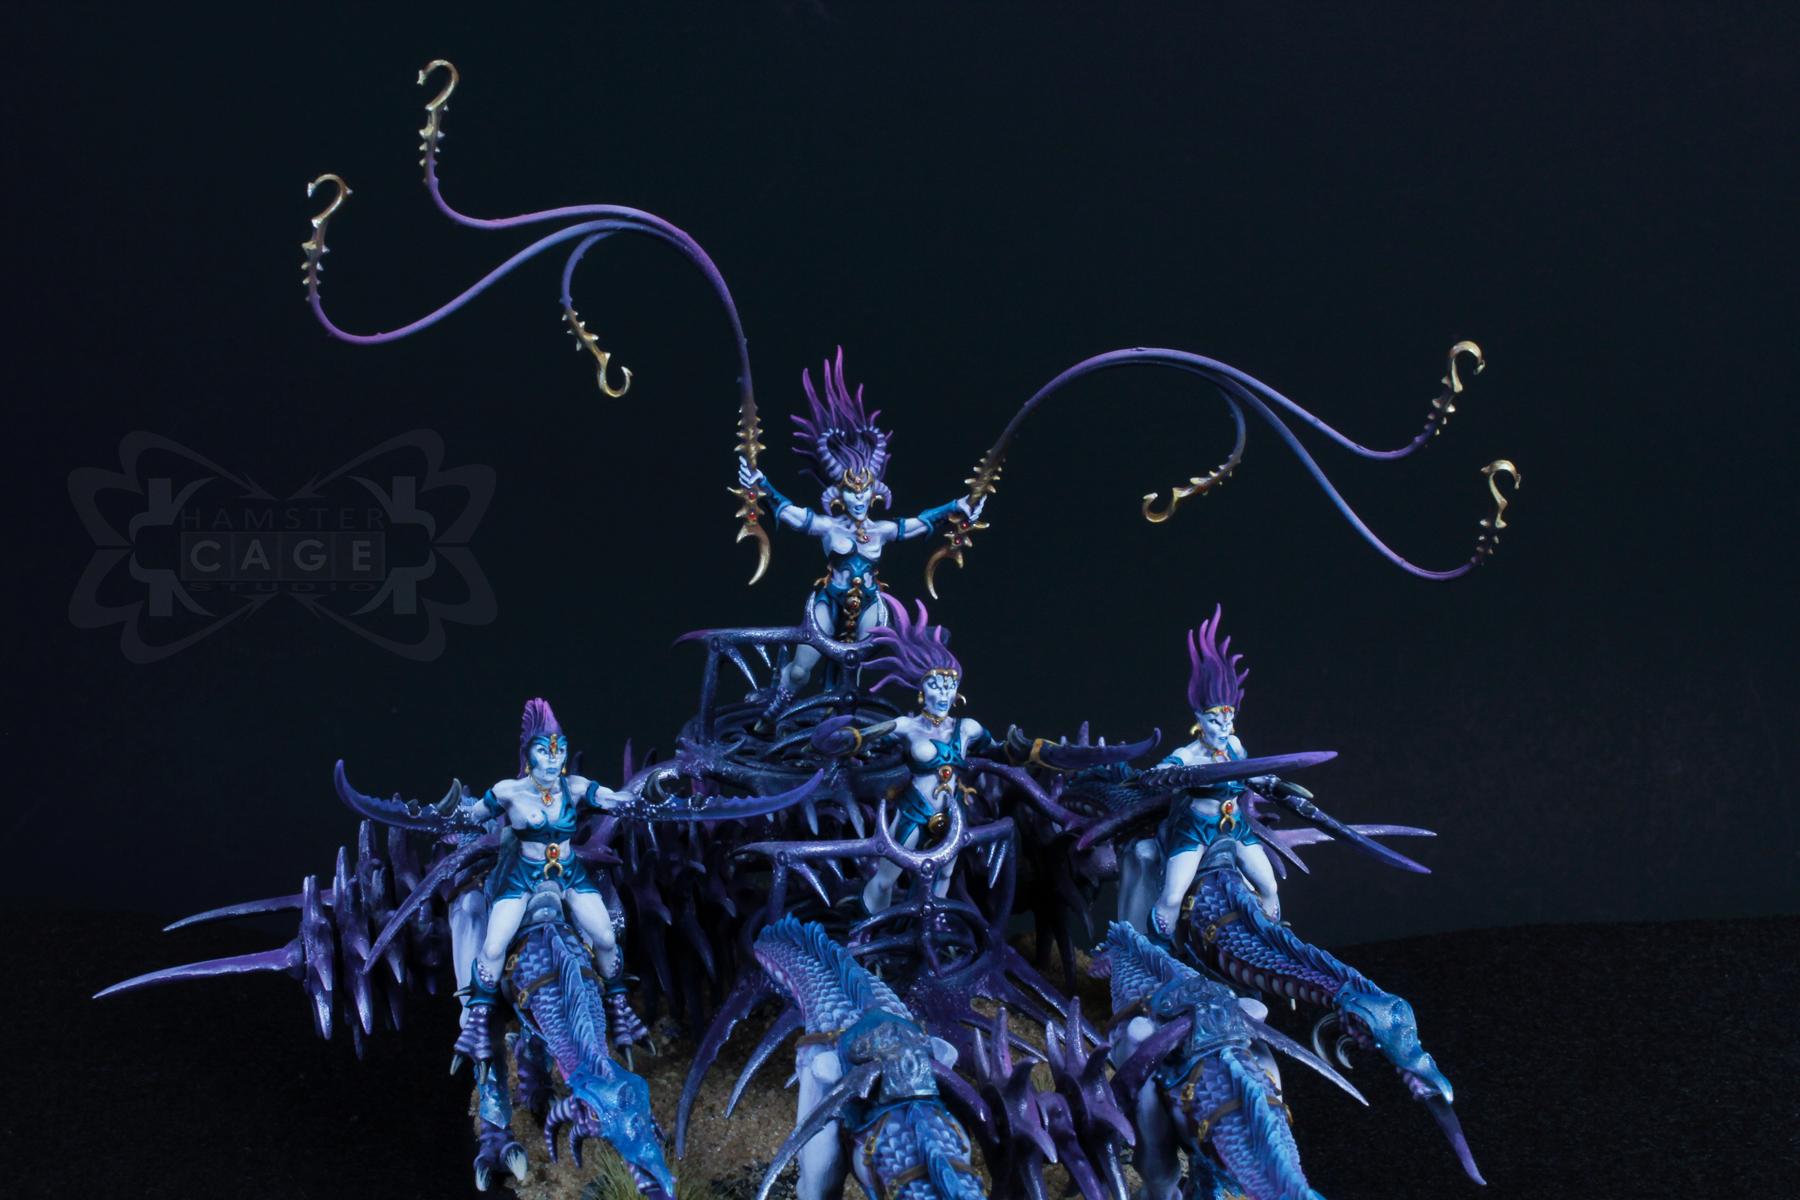 Chariot, Daemons, Demon Engine, Exalted, Exalted Chariot, Slaanesh, Slaanesh Chariot